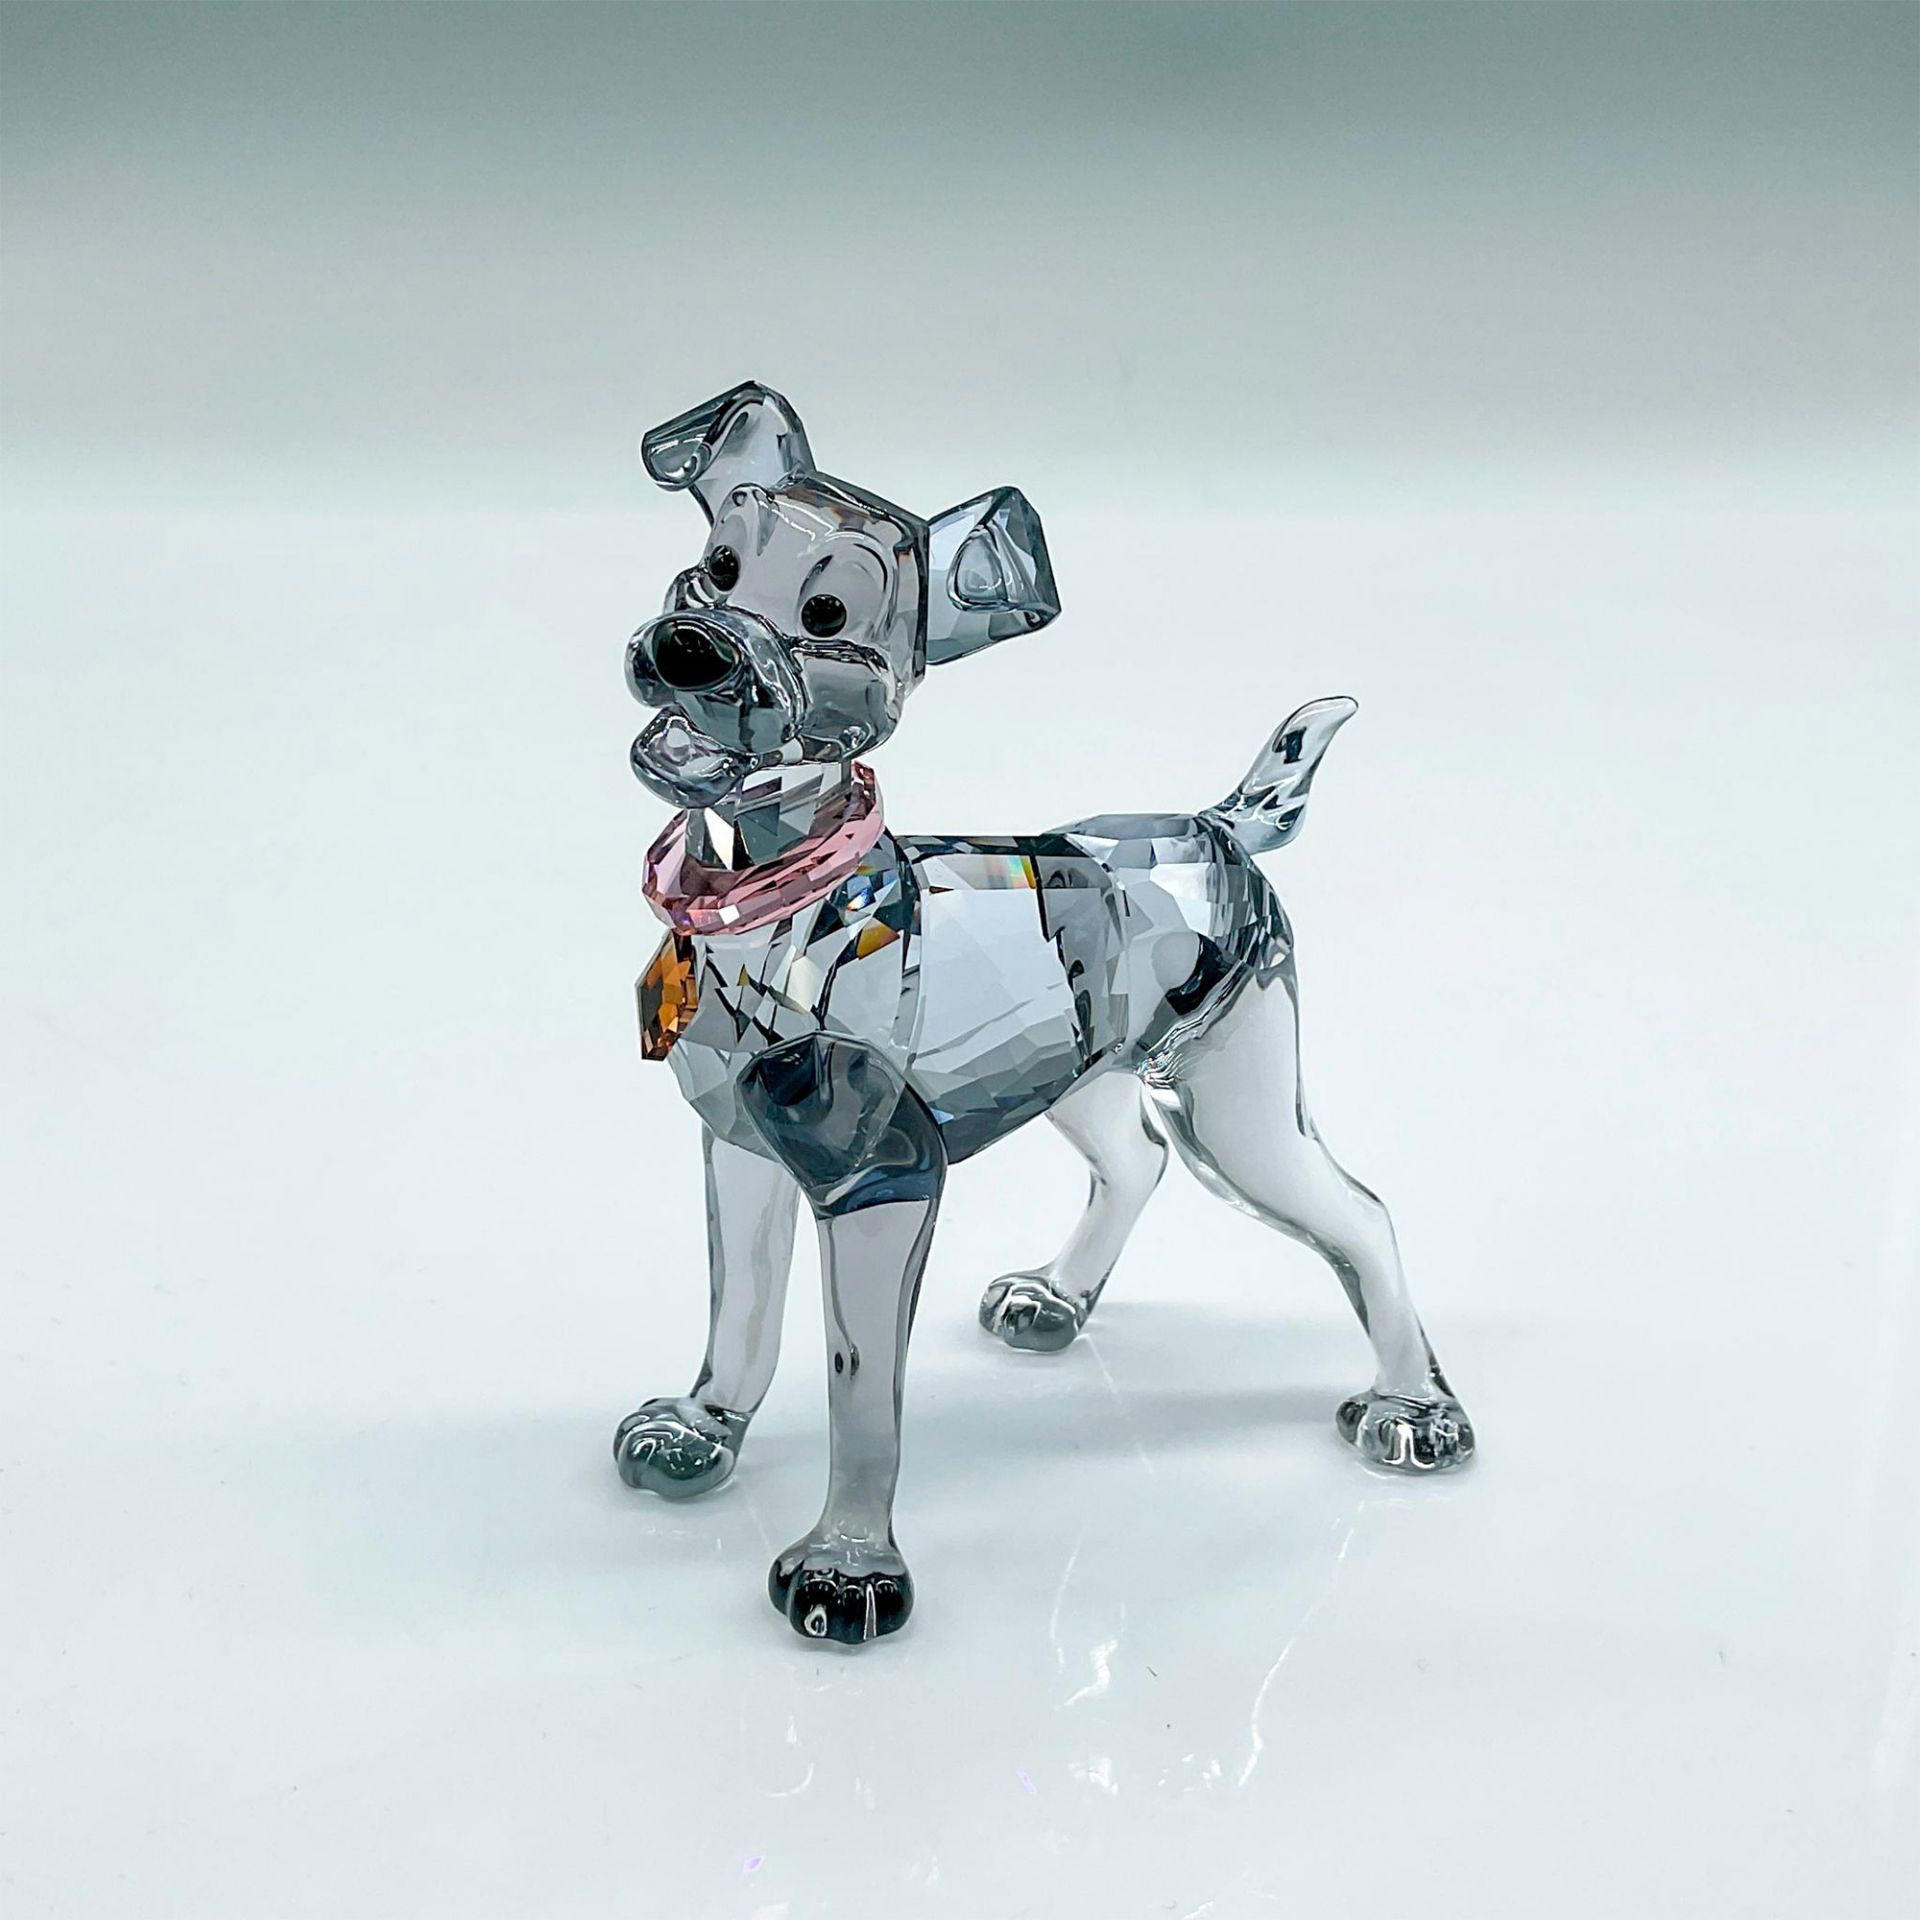 Swarovski Crystal Figurine, Tramp from Lady and the Tramp